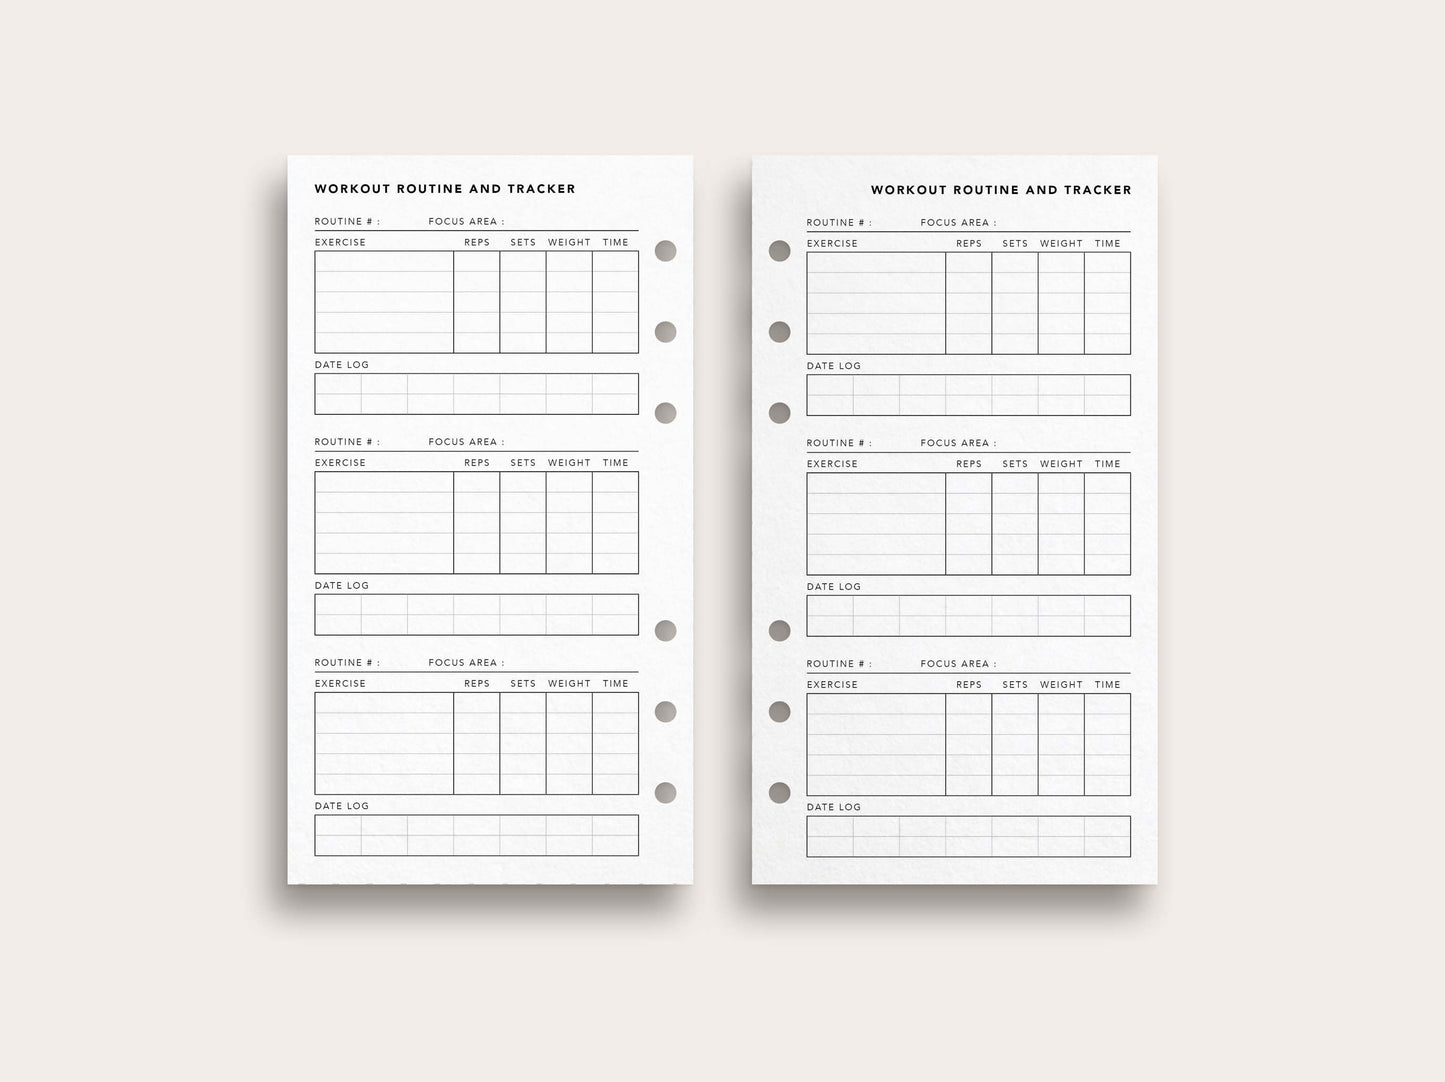 Workout Routine and Tracker with Date Log